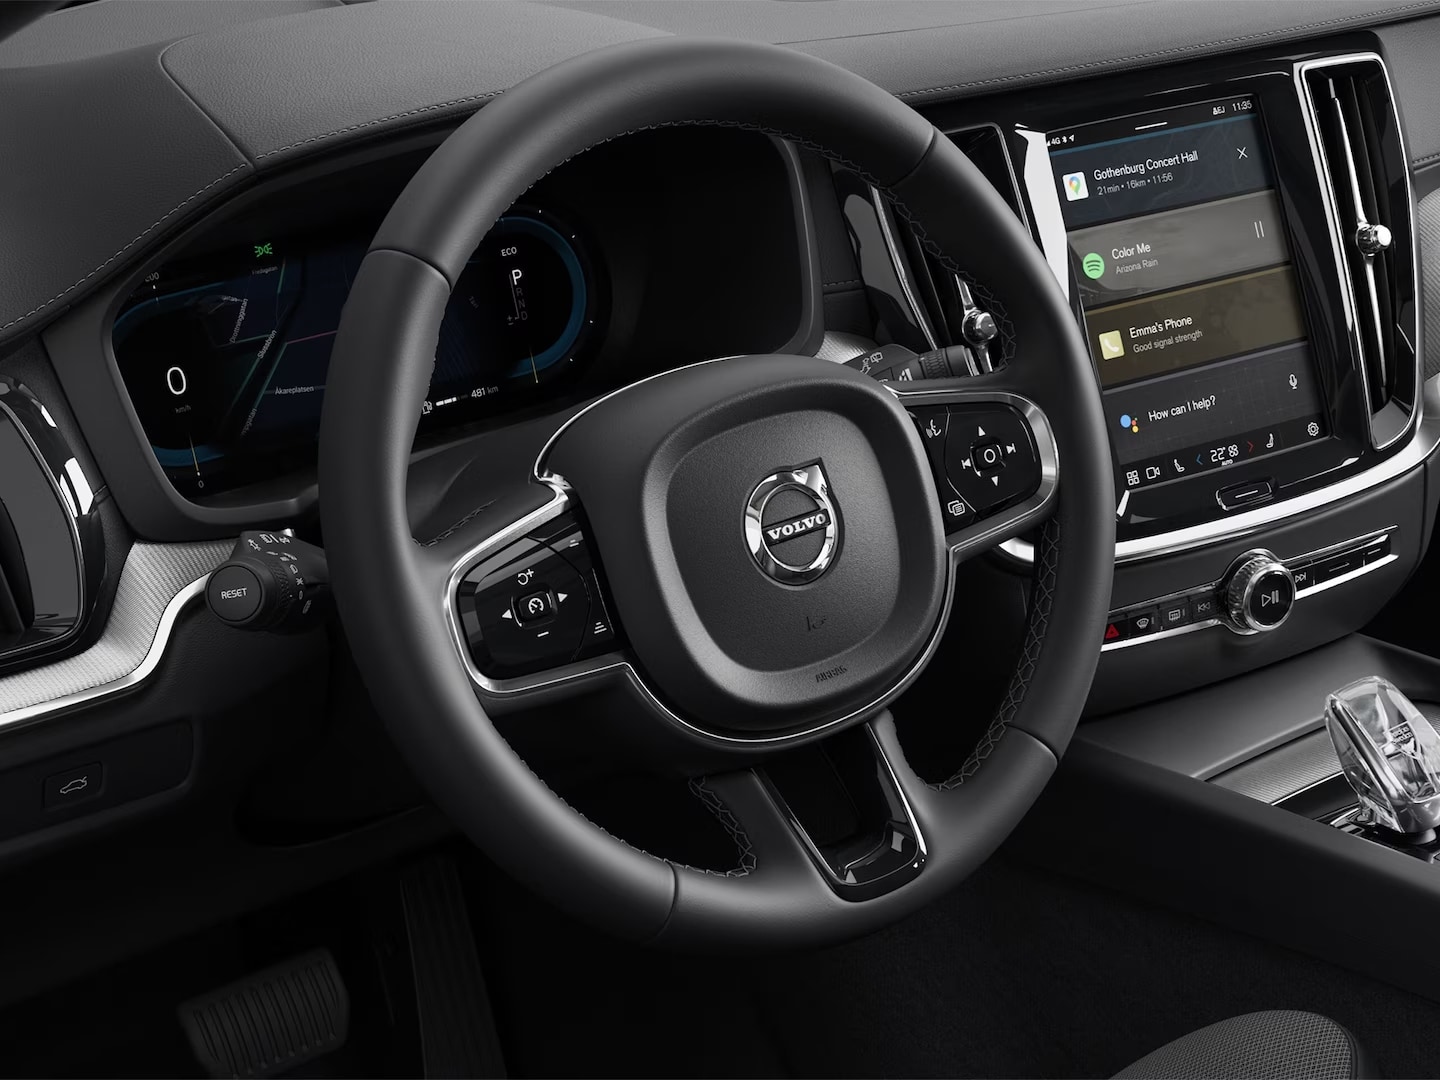 The Volvo S60 mild hybrid’s steering wheel, instrument panel, centre console and infotainment touchscreen.